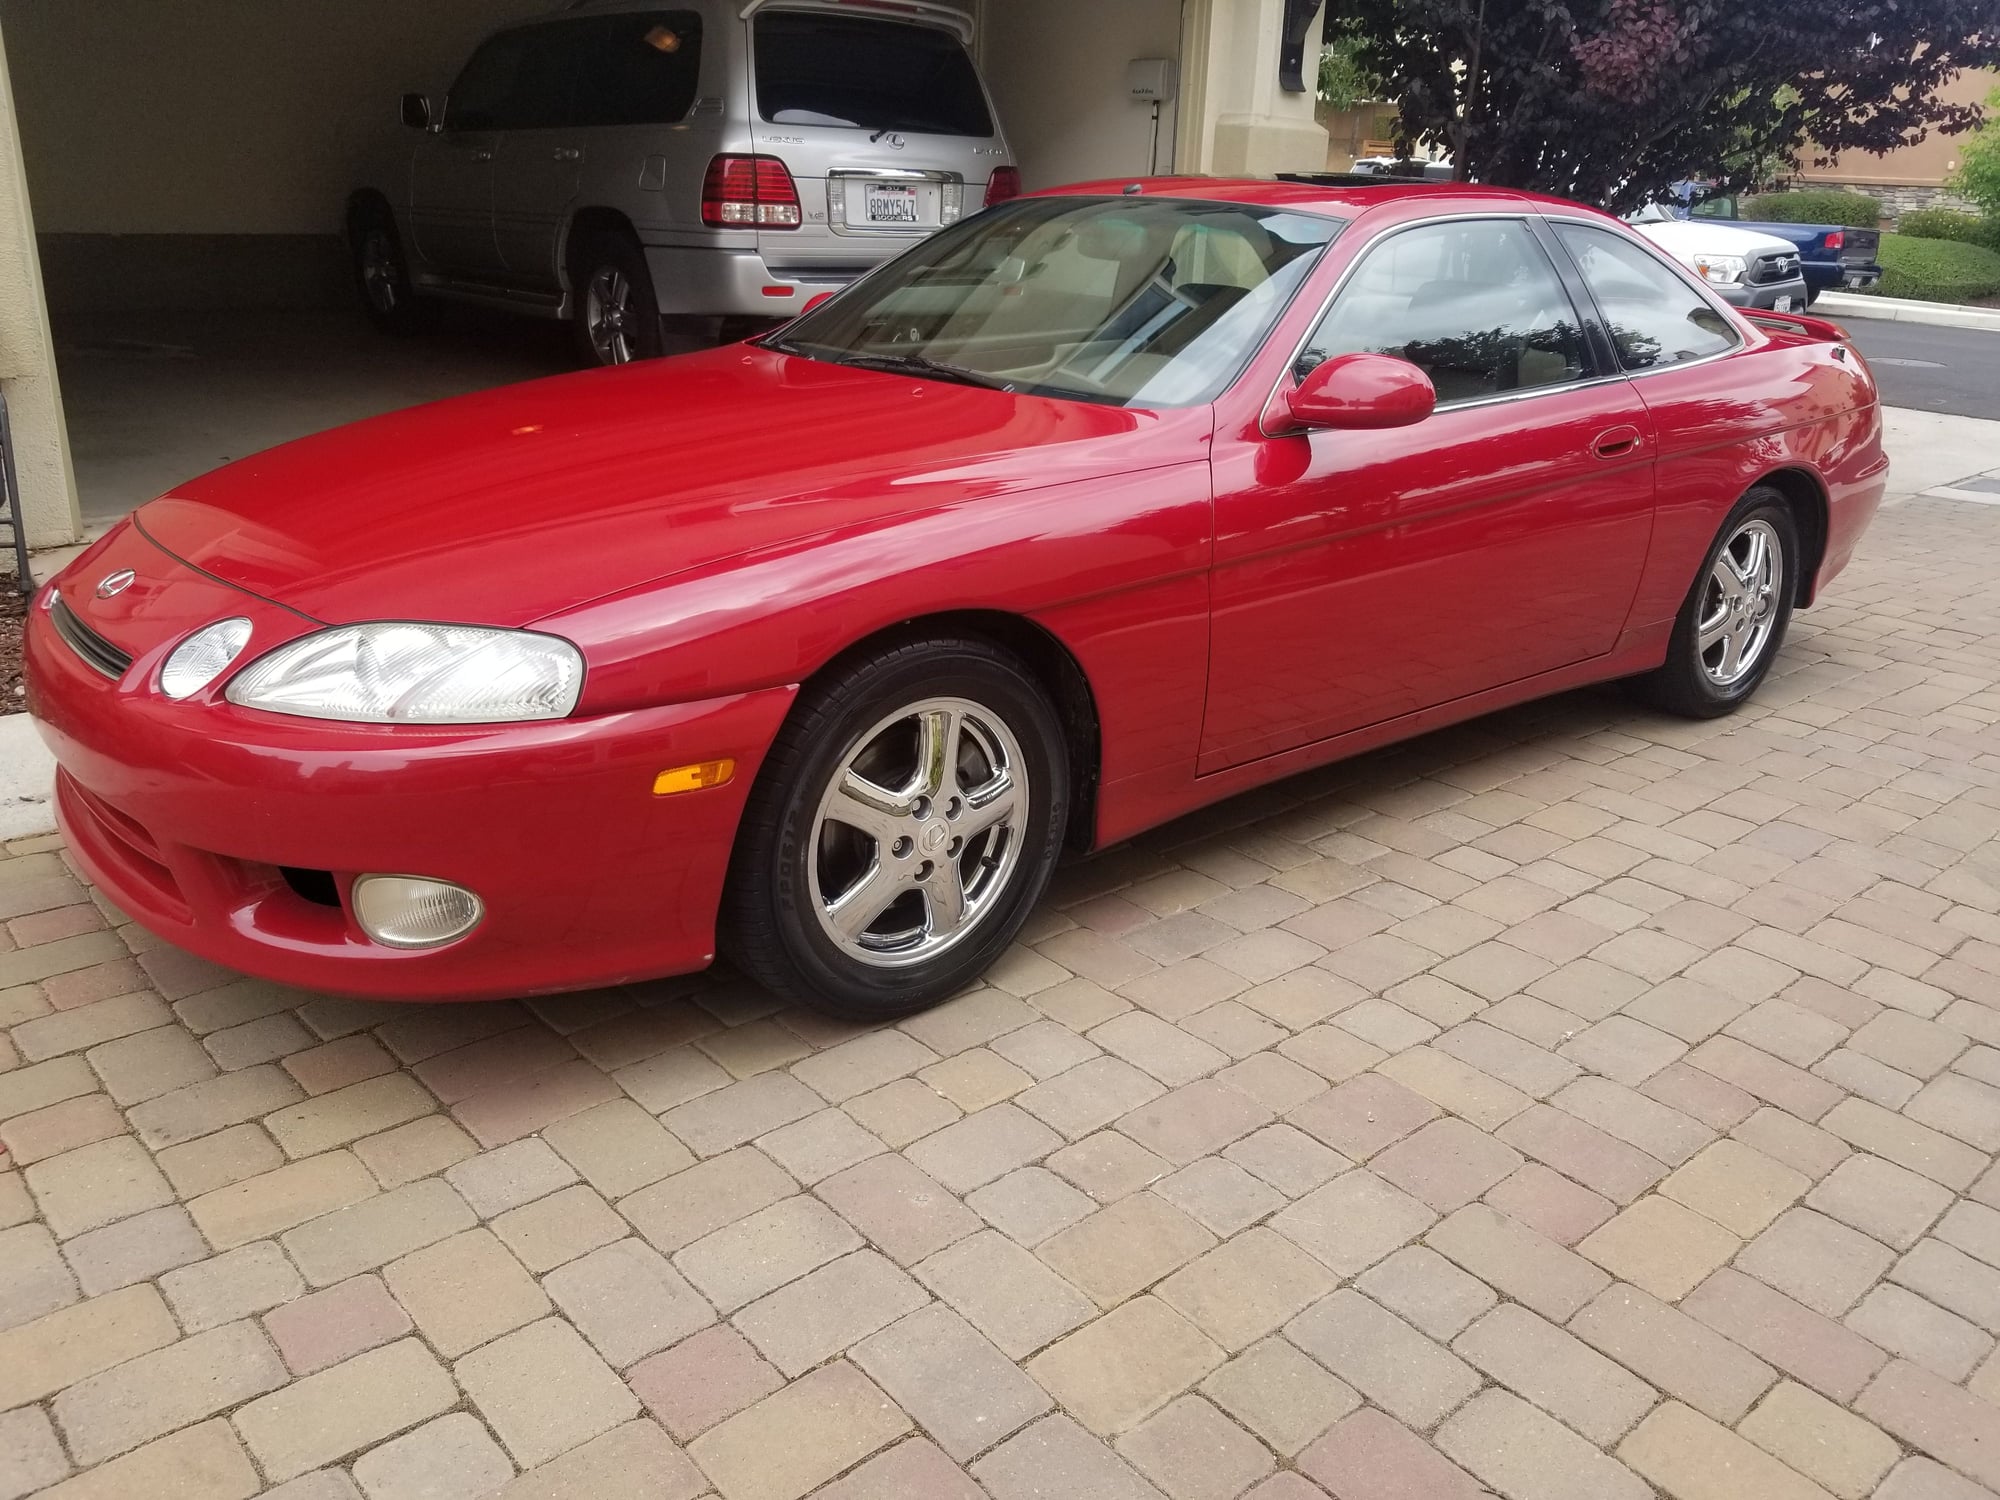 1999 Lexus SC300 - 1999 Lexus SC300 - Used - VIN JT8CD32Z6X1006483 - 134,800 Miles - 6 cyl - 2WD - Automatic - Coupe - Red - Brentwood, CA 94513, United States